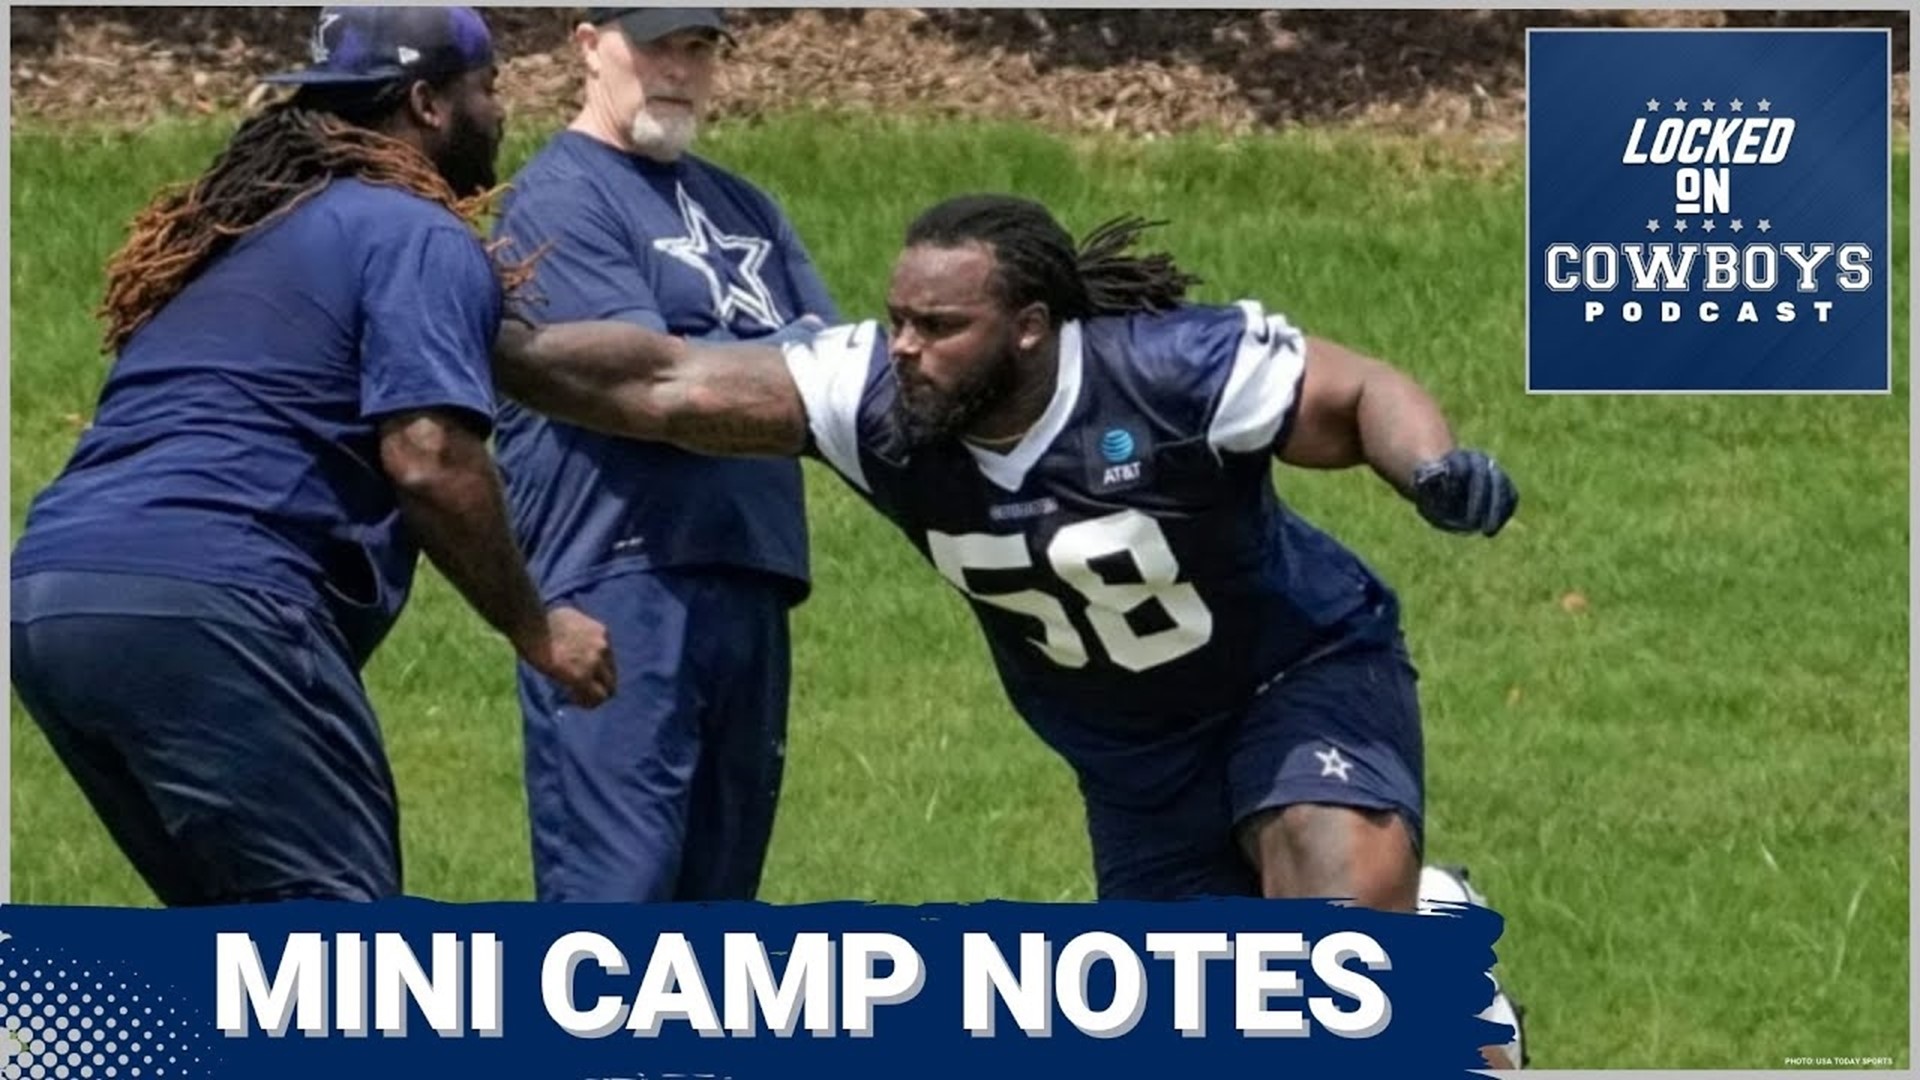 Marcus Mosher and Landon McCool give their notes from the Dallas Cowboys rookie minicamp that took place over the weekend. They discuss Mazi Smith's development.